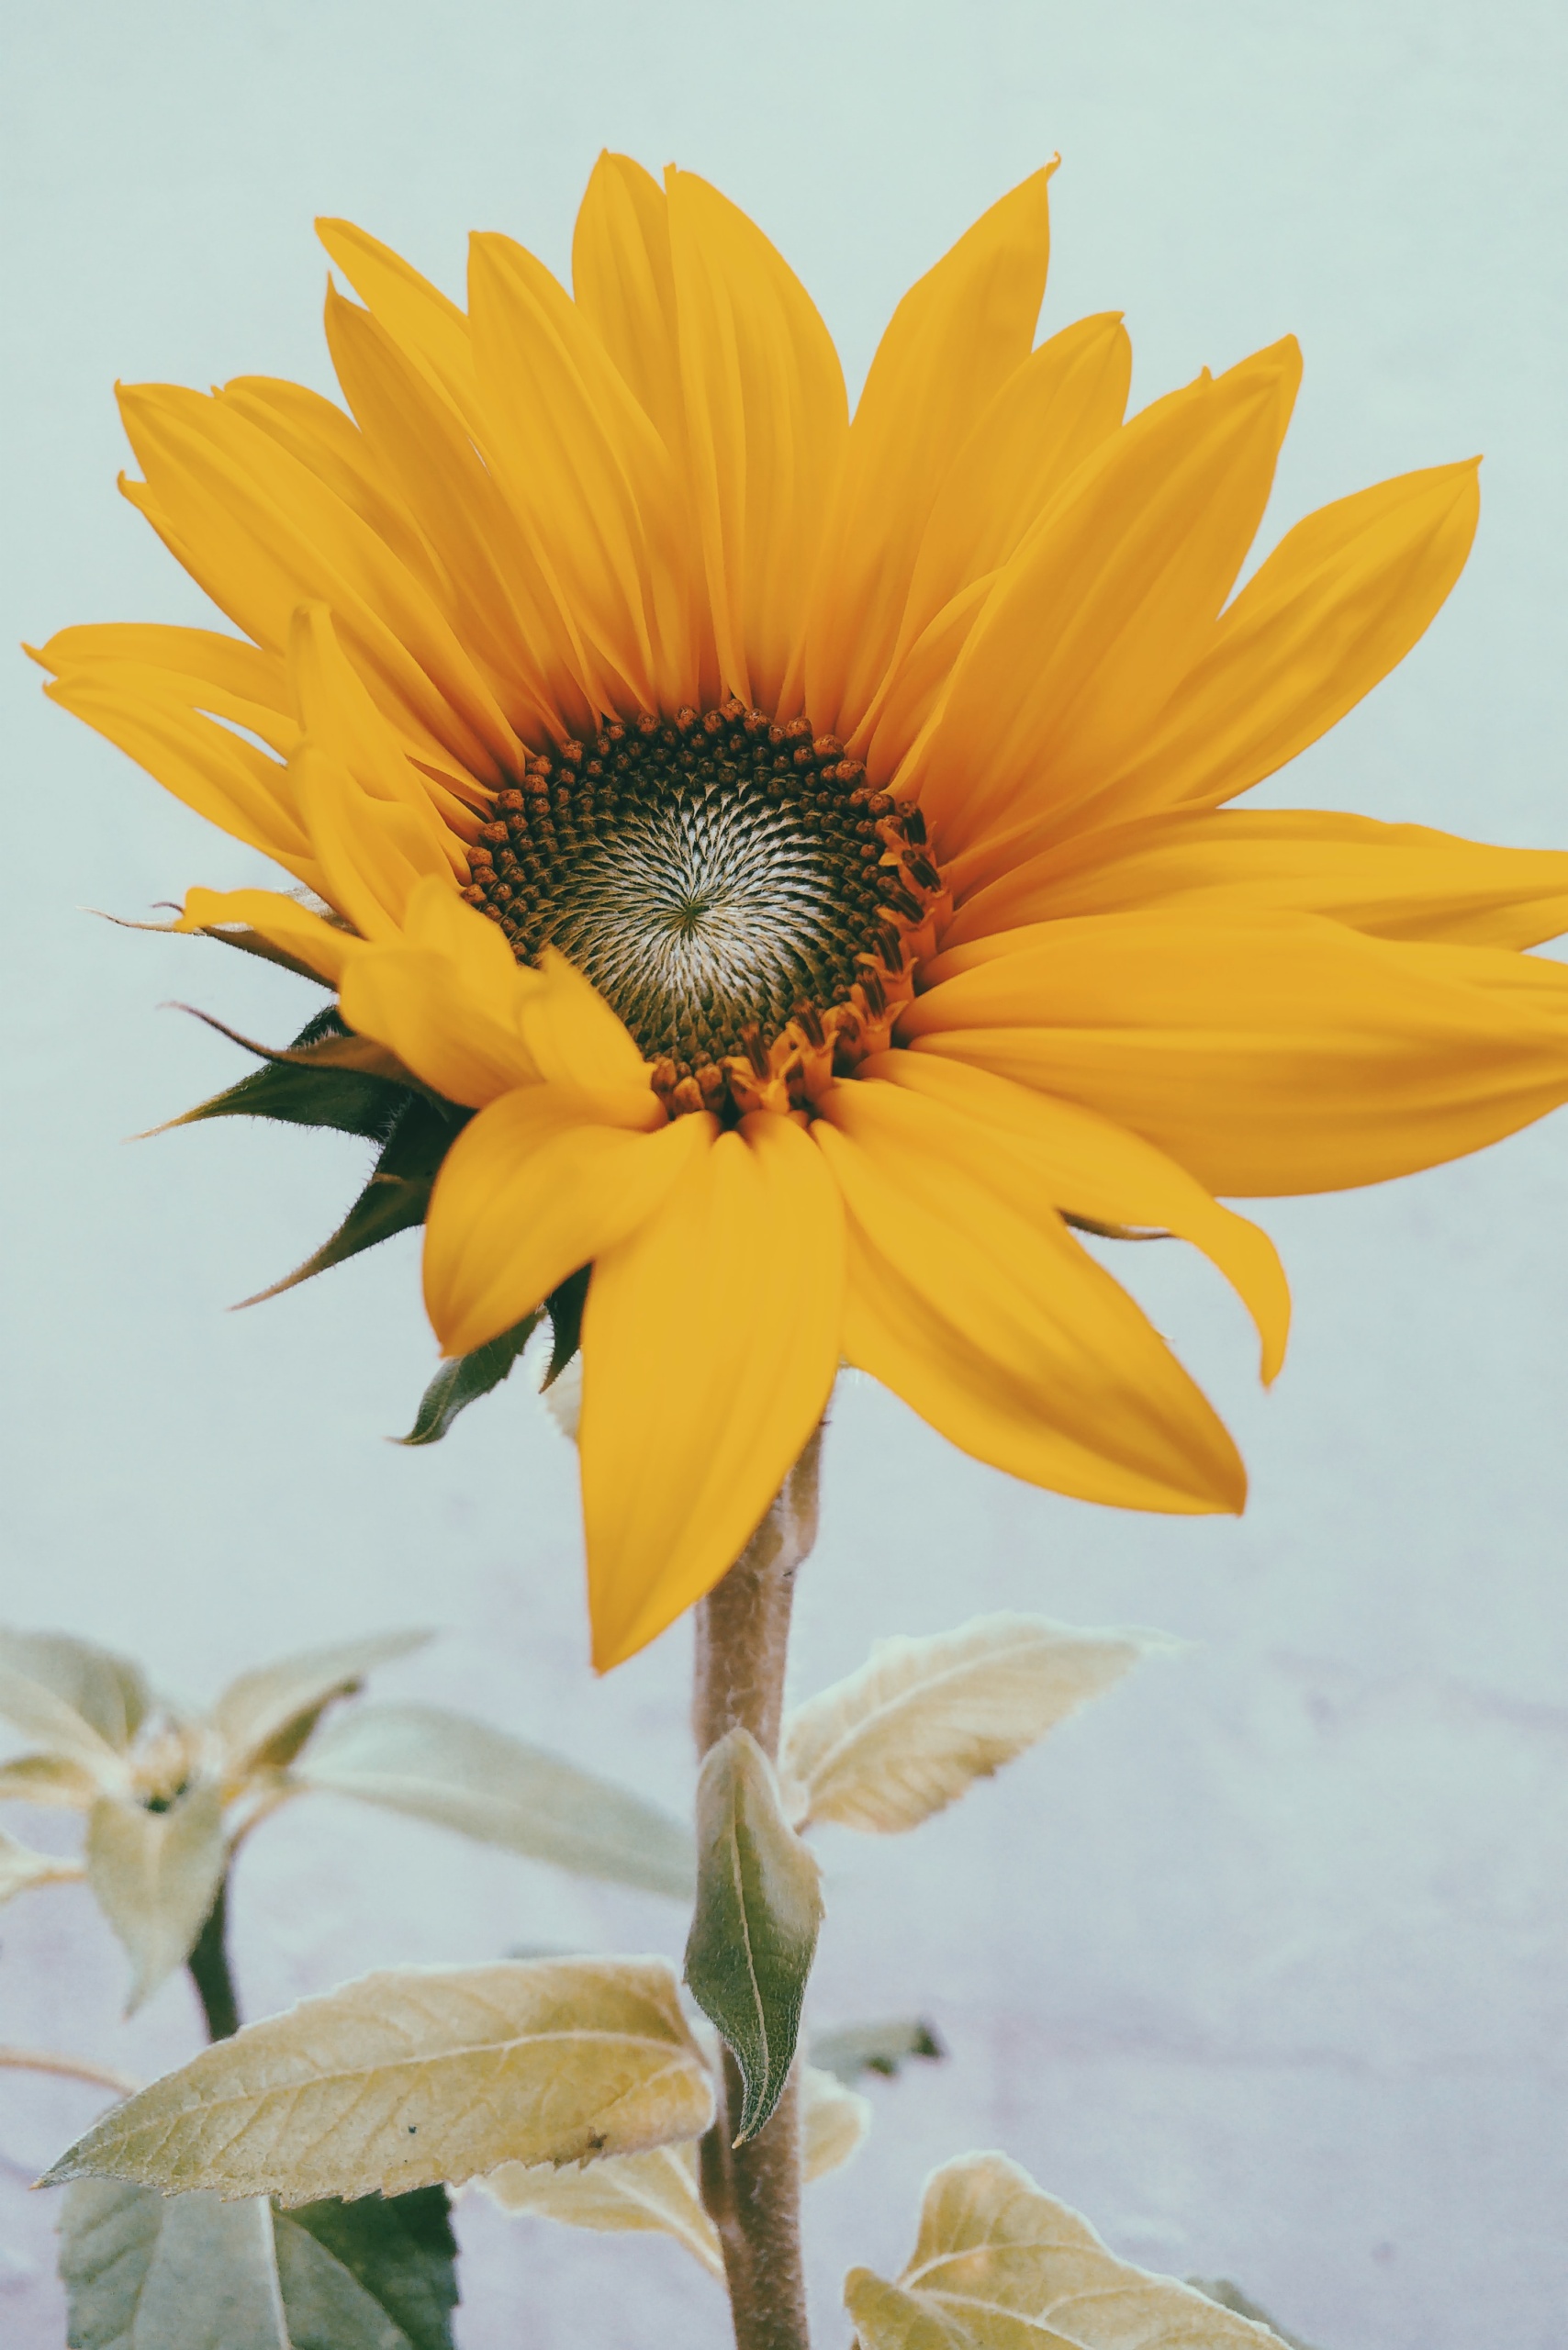 Yellow Aesthetic Sunflower Wallpaper Backgrounds For iPhone